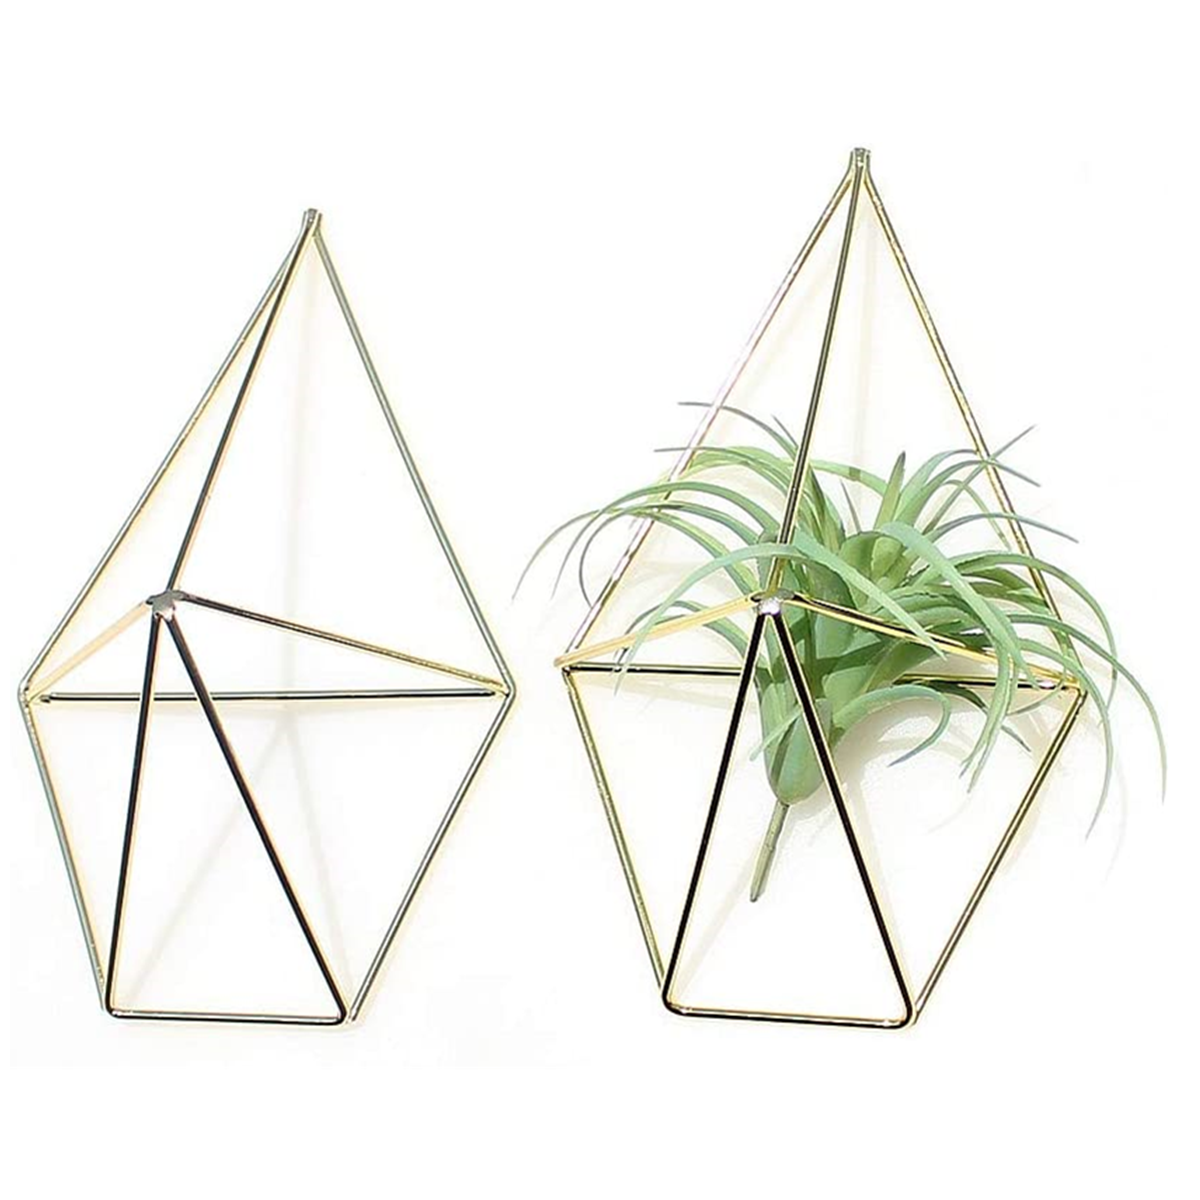 2 Pcs Wall Mounted Geometric Flower Stand Wall Hanging Wrought Iron Plant Storage Rack Holder Home O